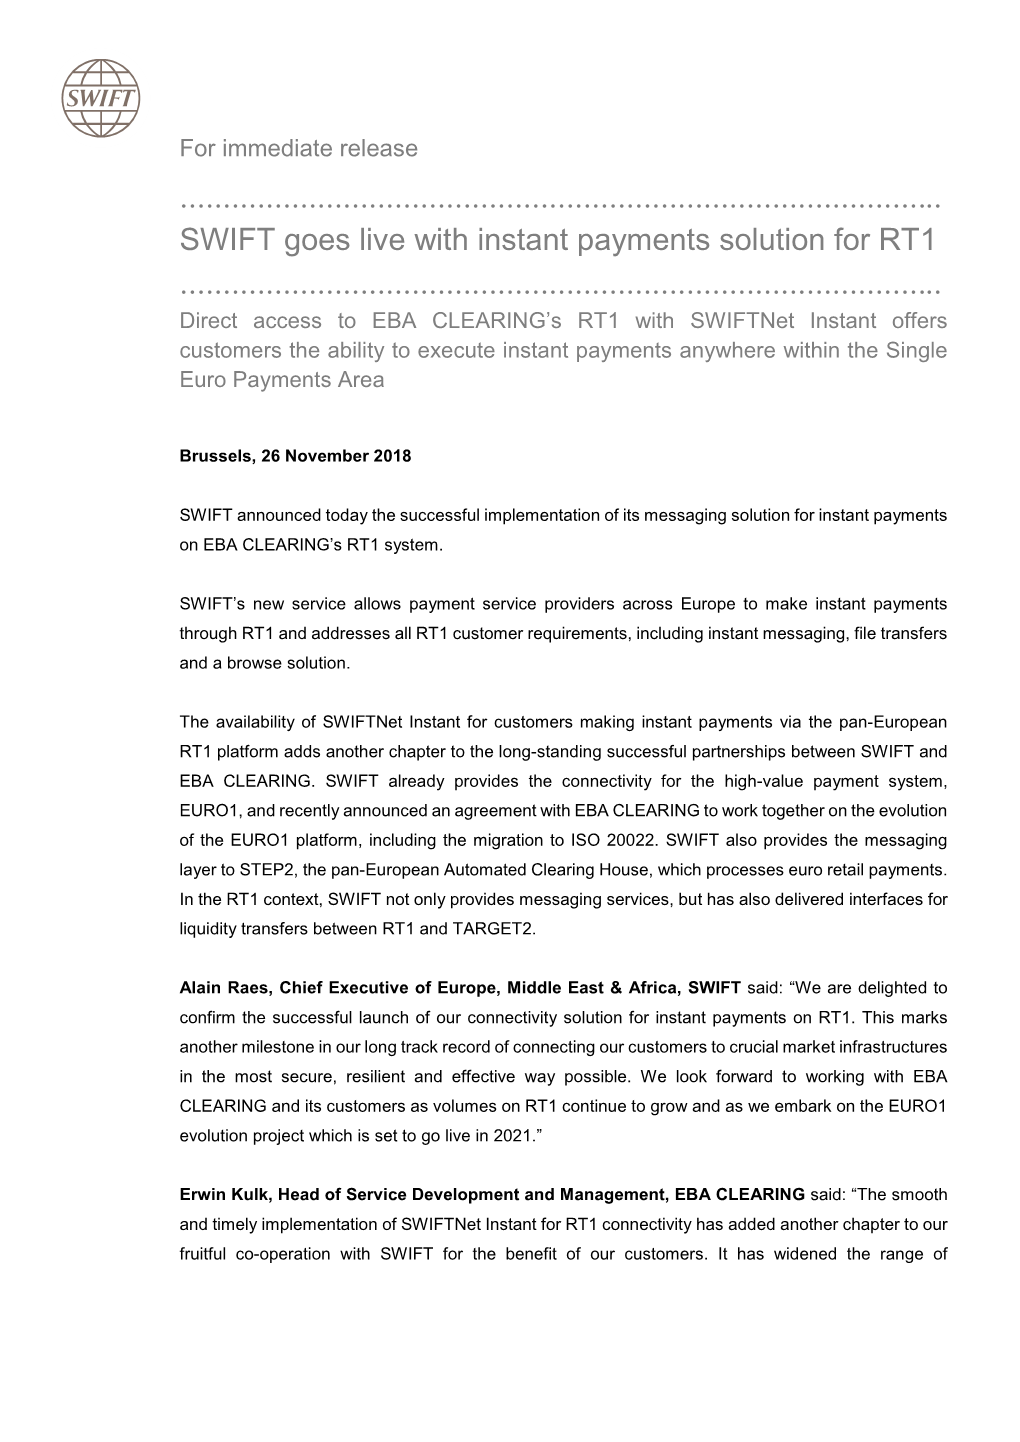 SWIFT Goes Live with Instant Payments Solution for RT1